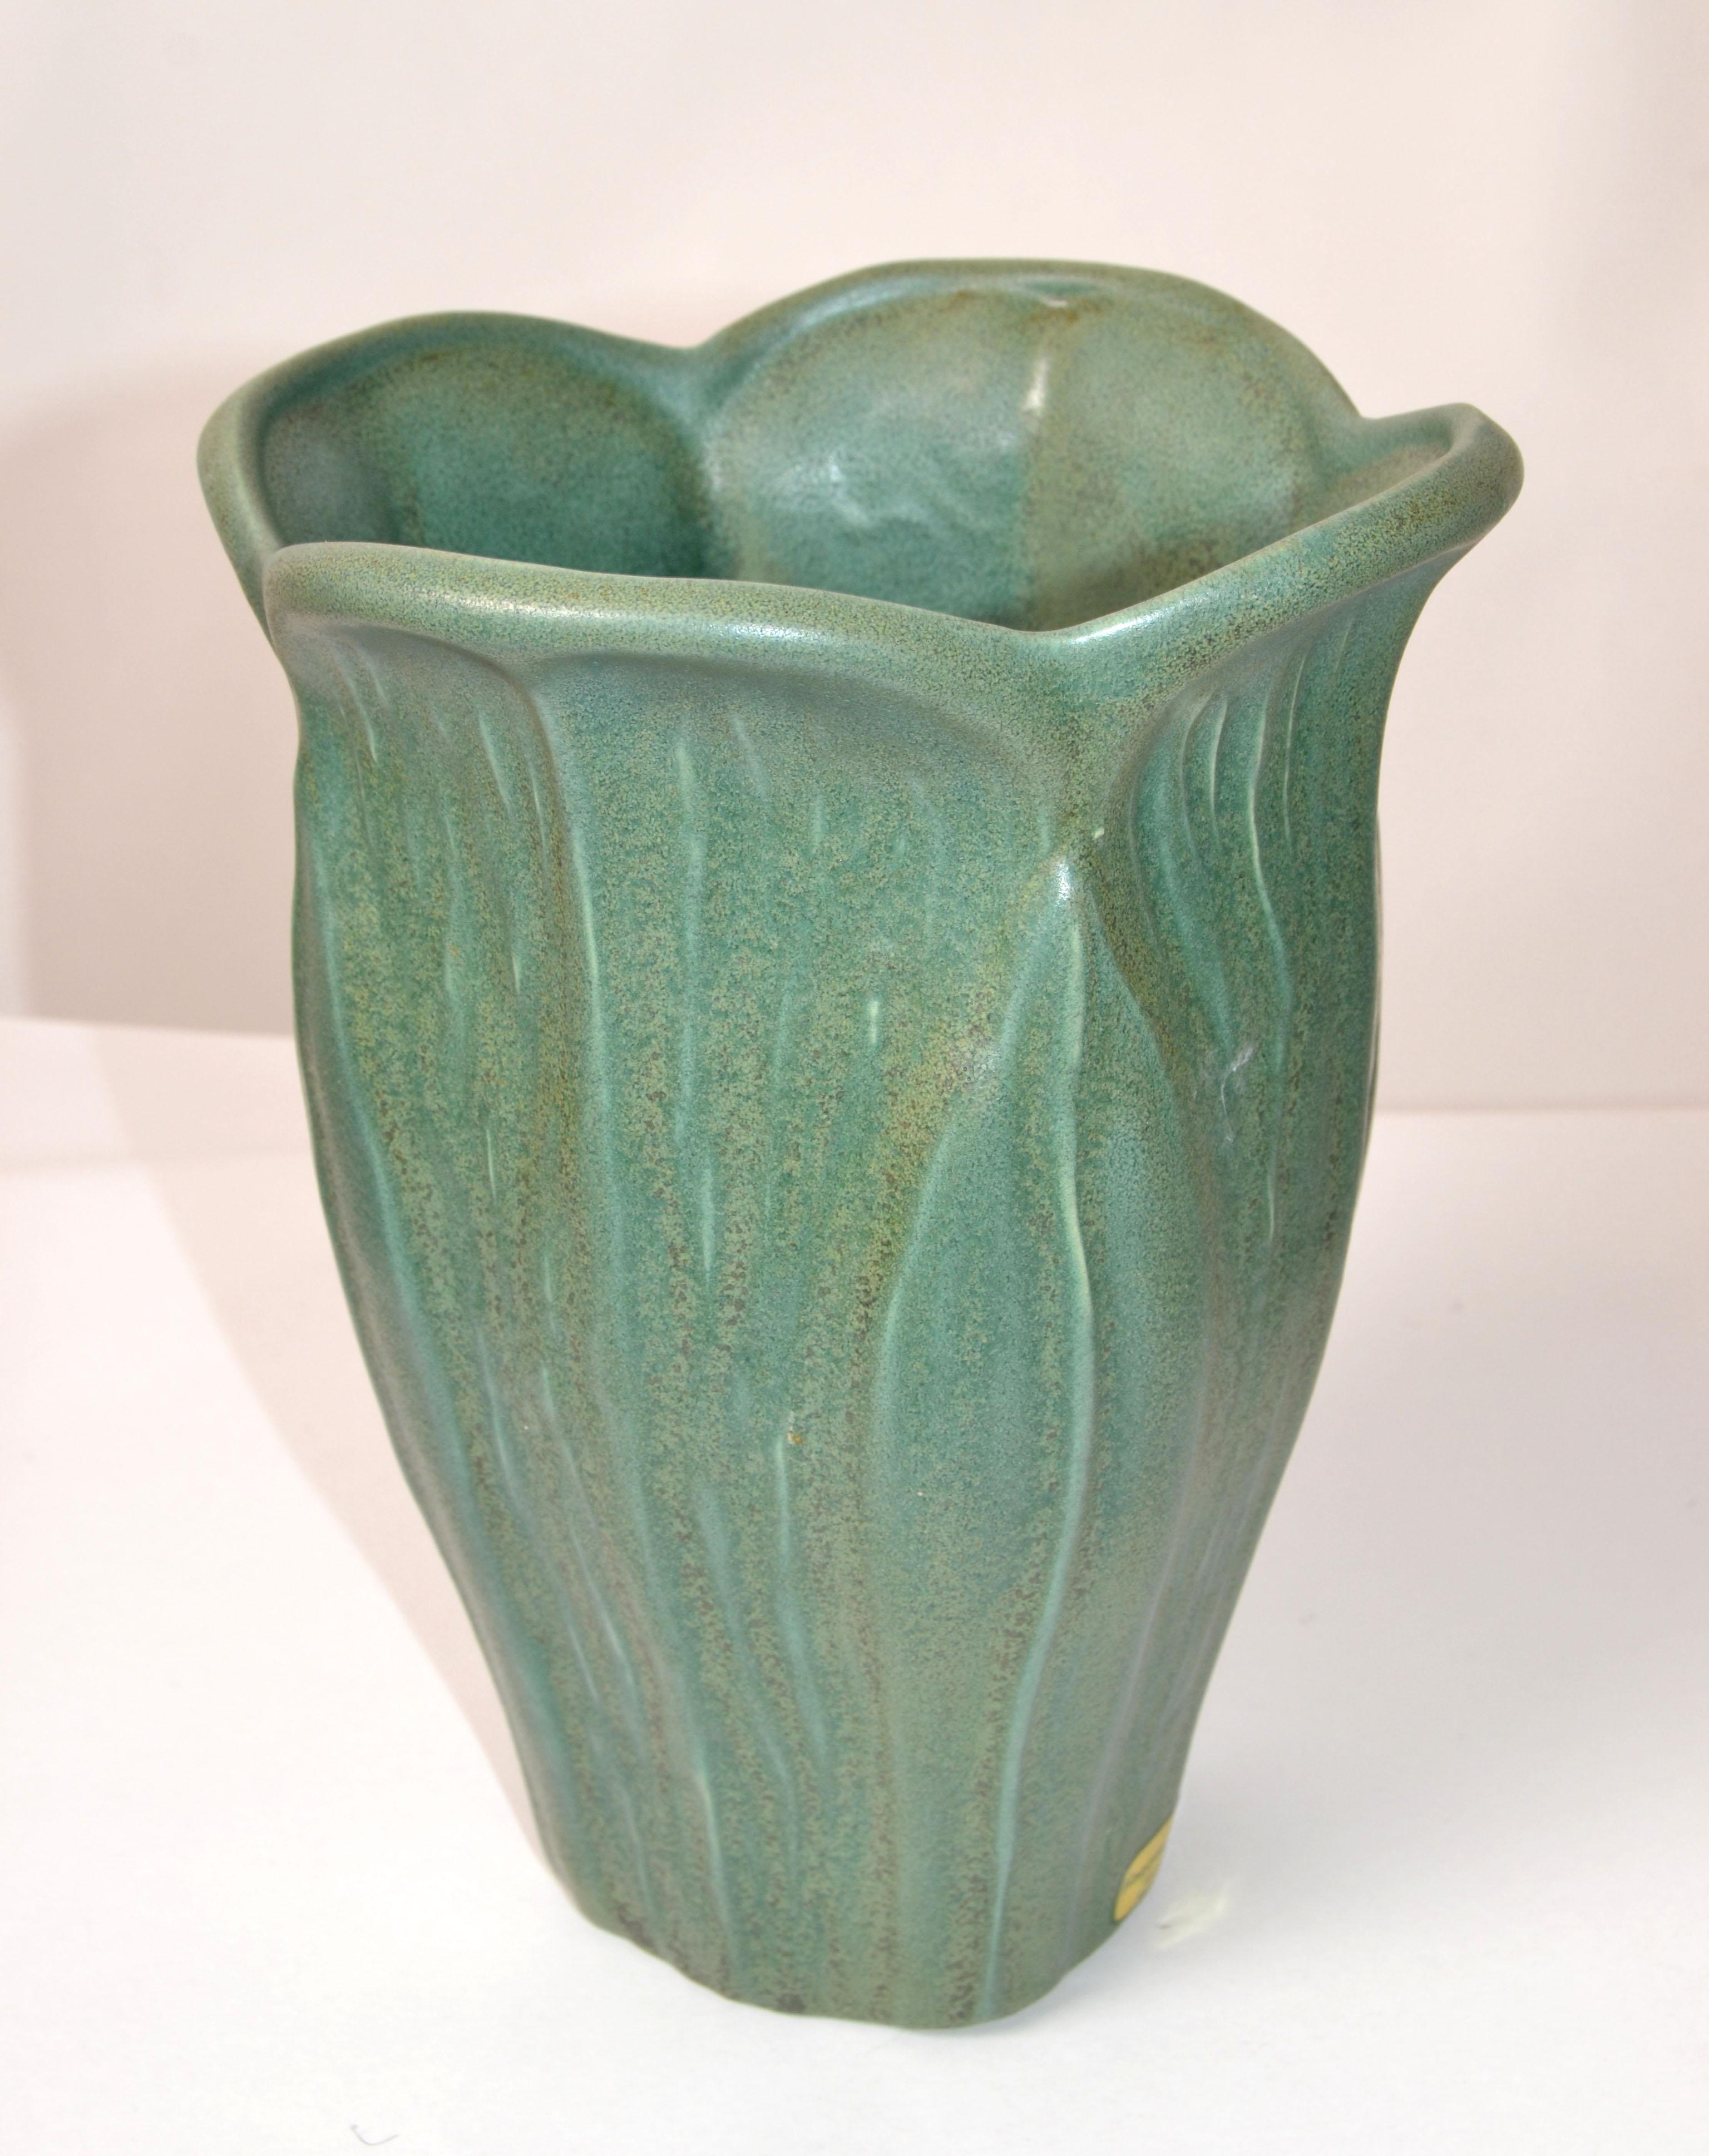 Original Mid-Century Modern Haeger Floral handcrafted pottery flower vase in mint green glaze. Made in America.
Original foil label at the base.
Impressive and practical as well.